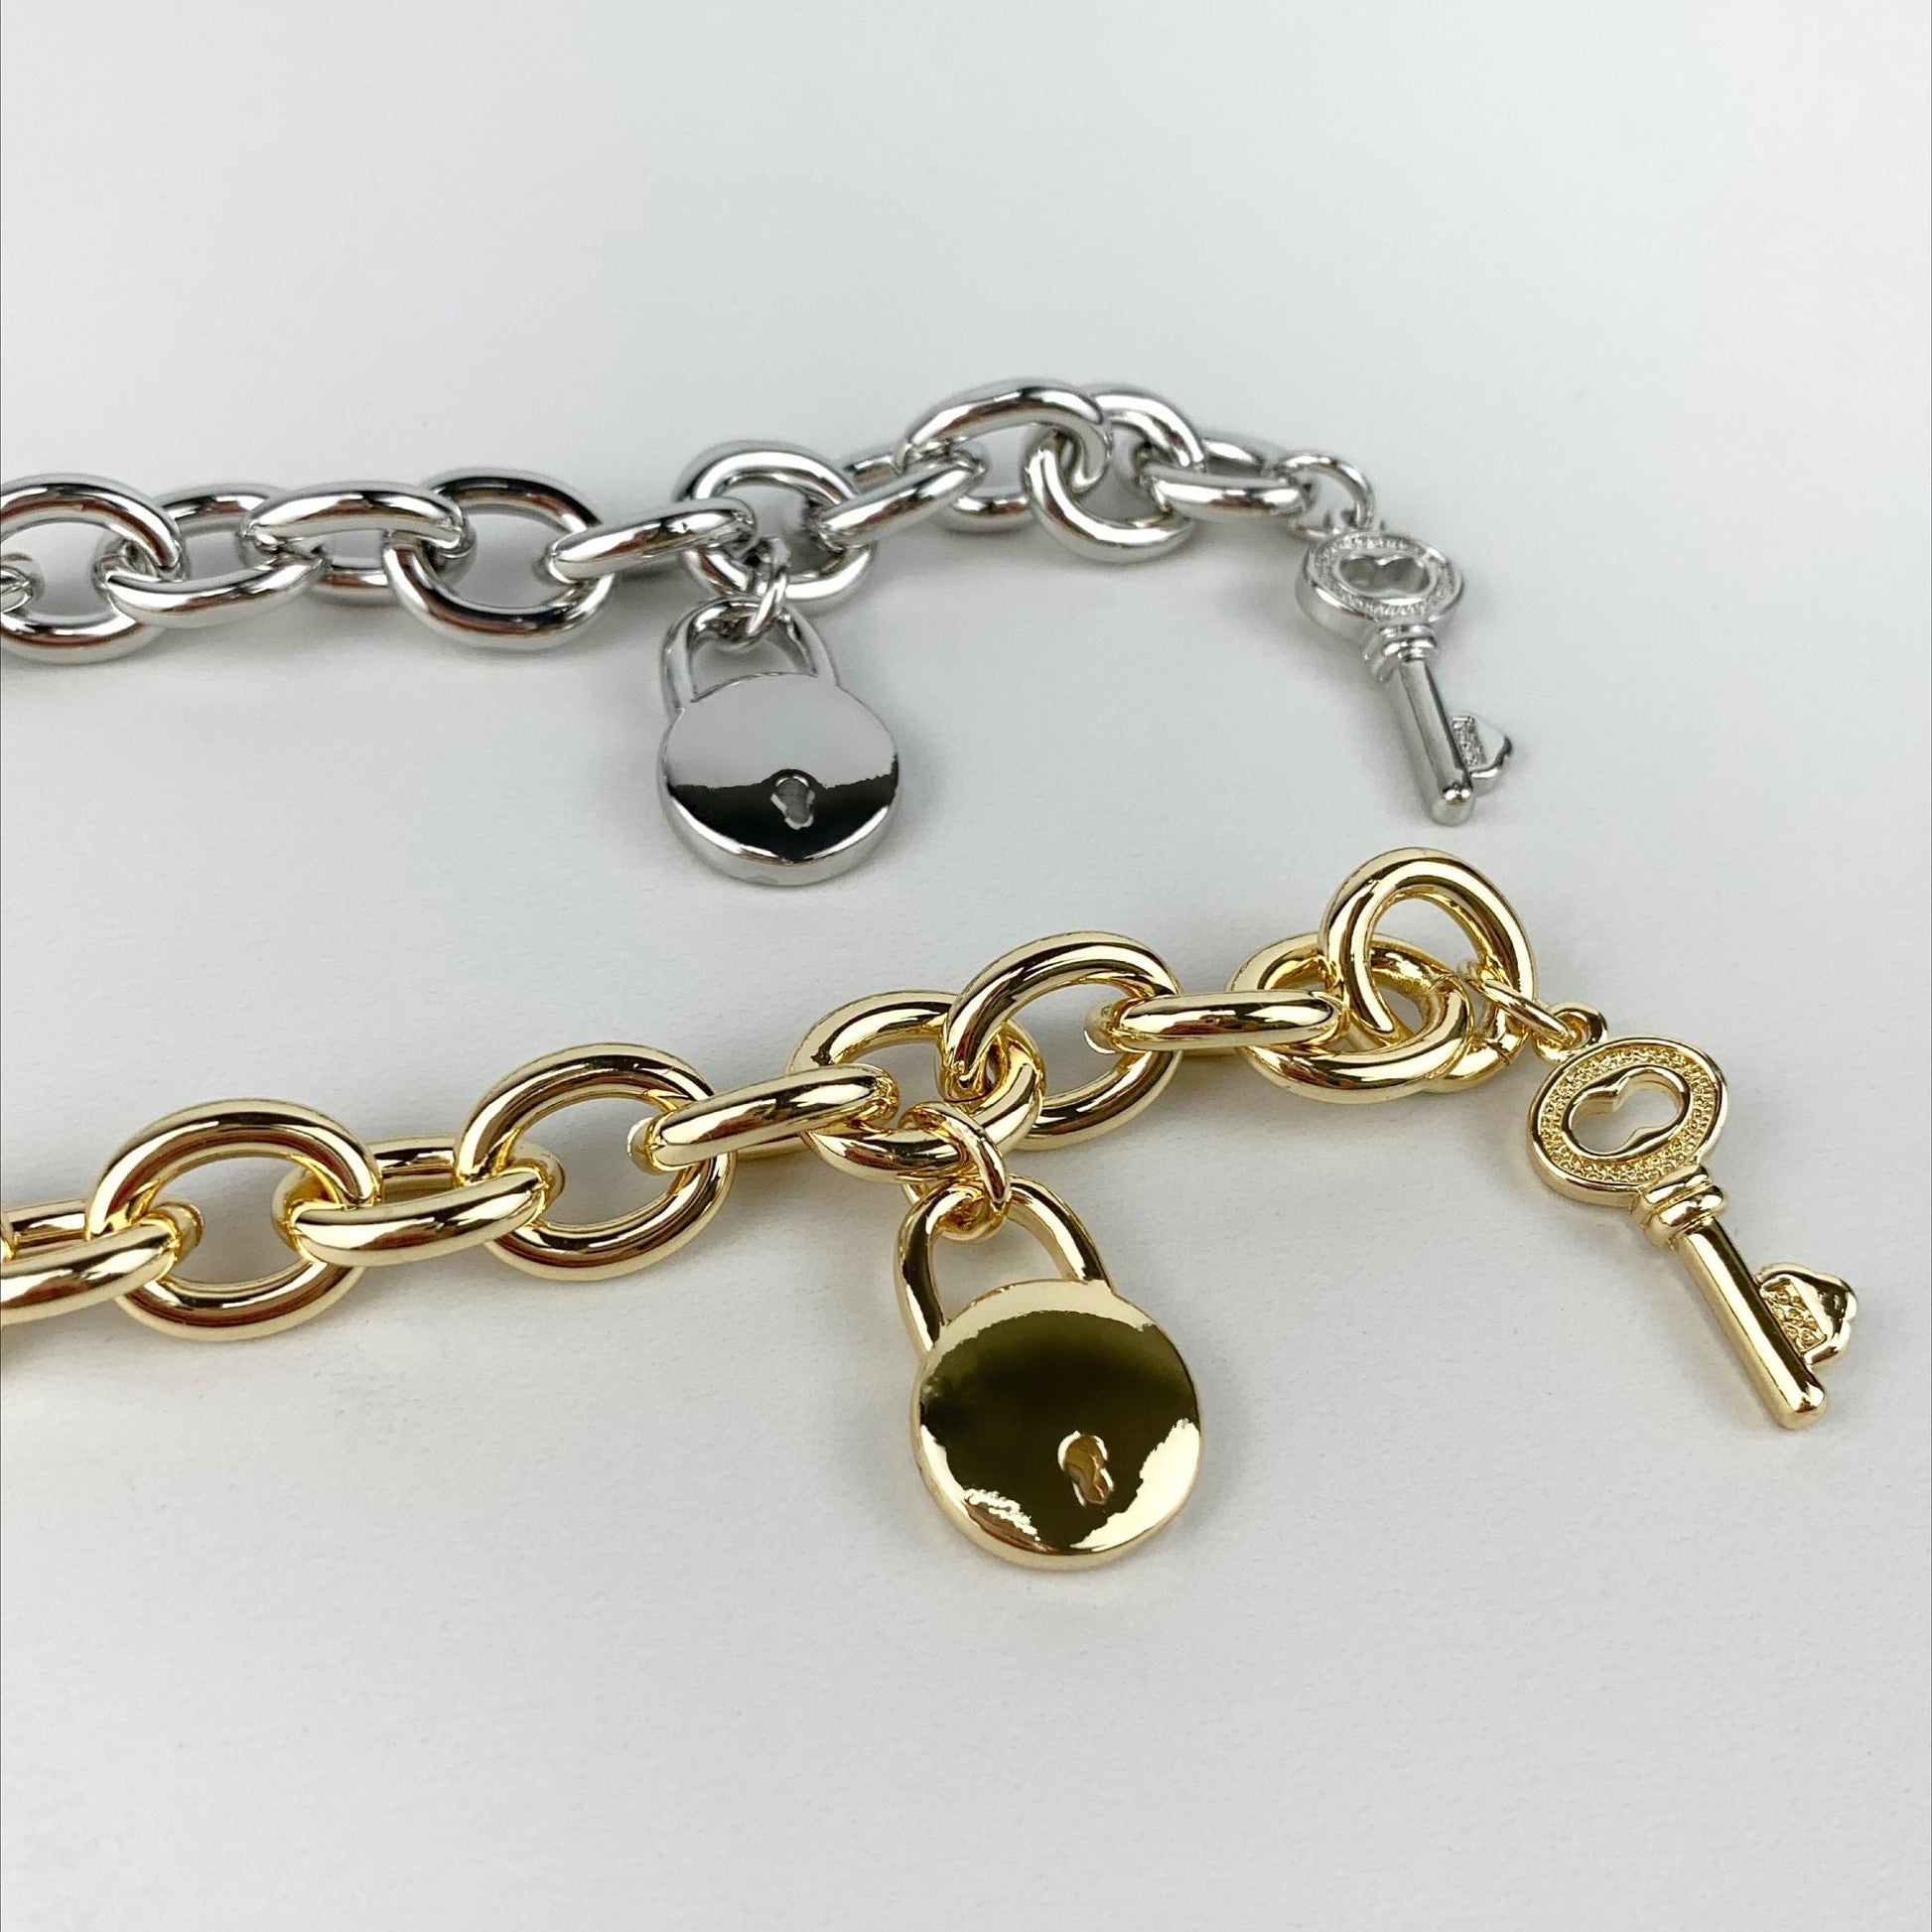 Chunky 18k Gold Filled Oval Link Chain Charms Bracelet Featuring Lock and Key, Gold or Silver, Wholesale Jewelry Supplies